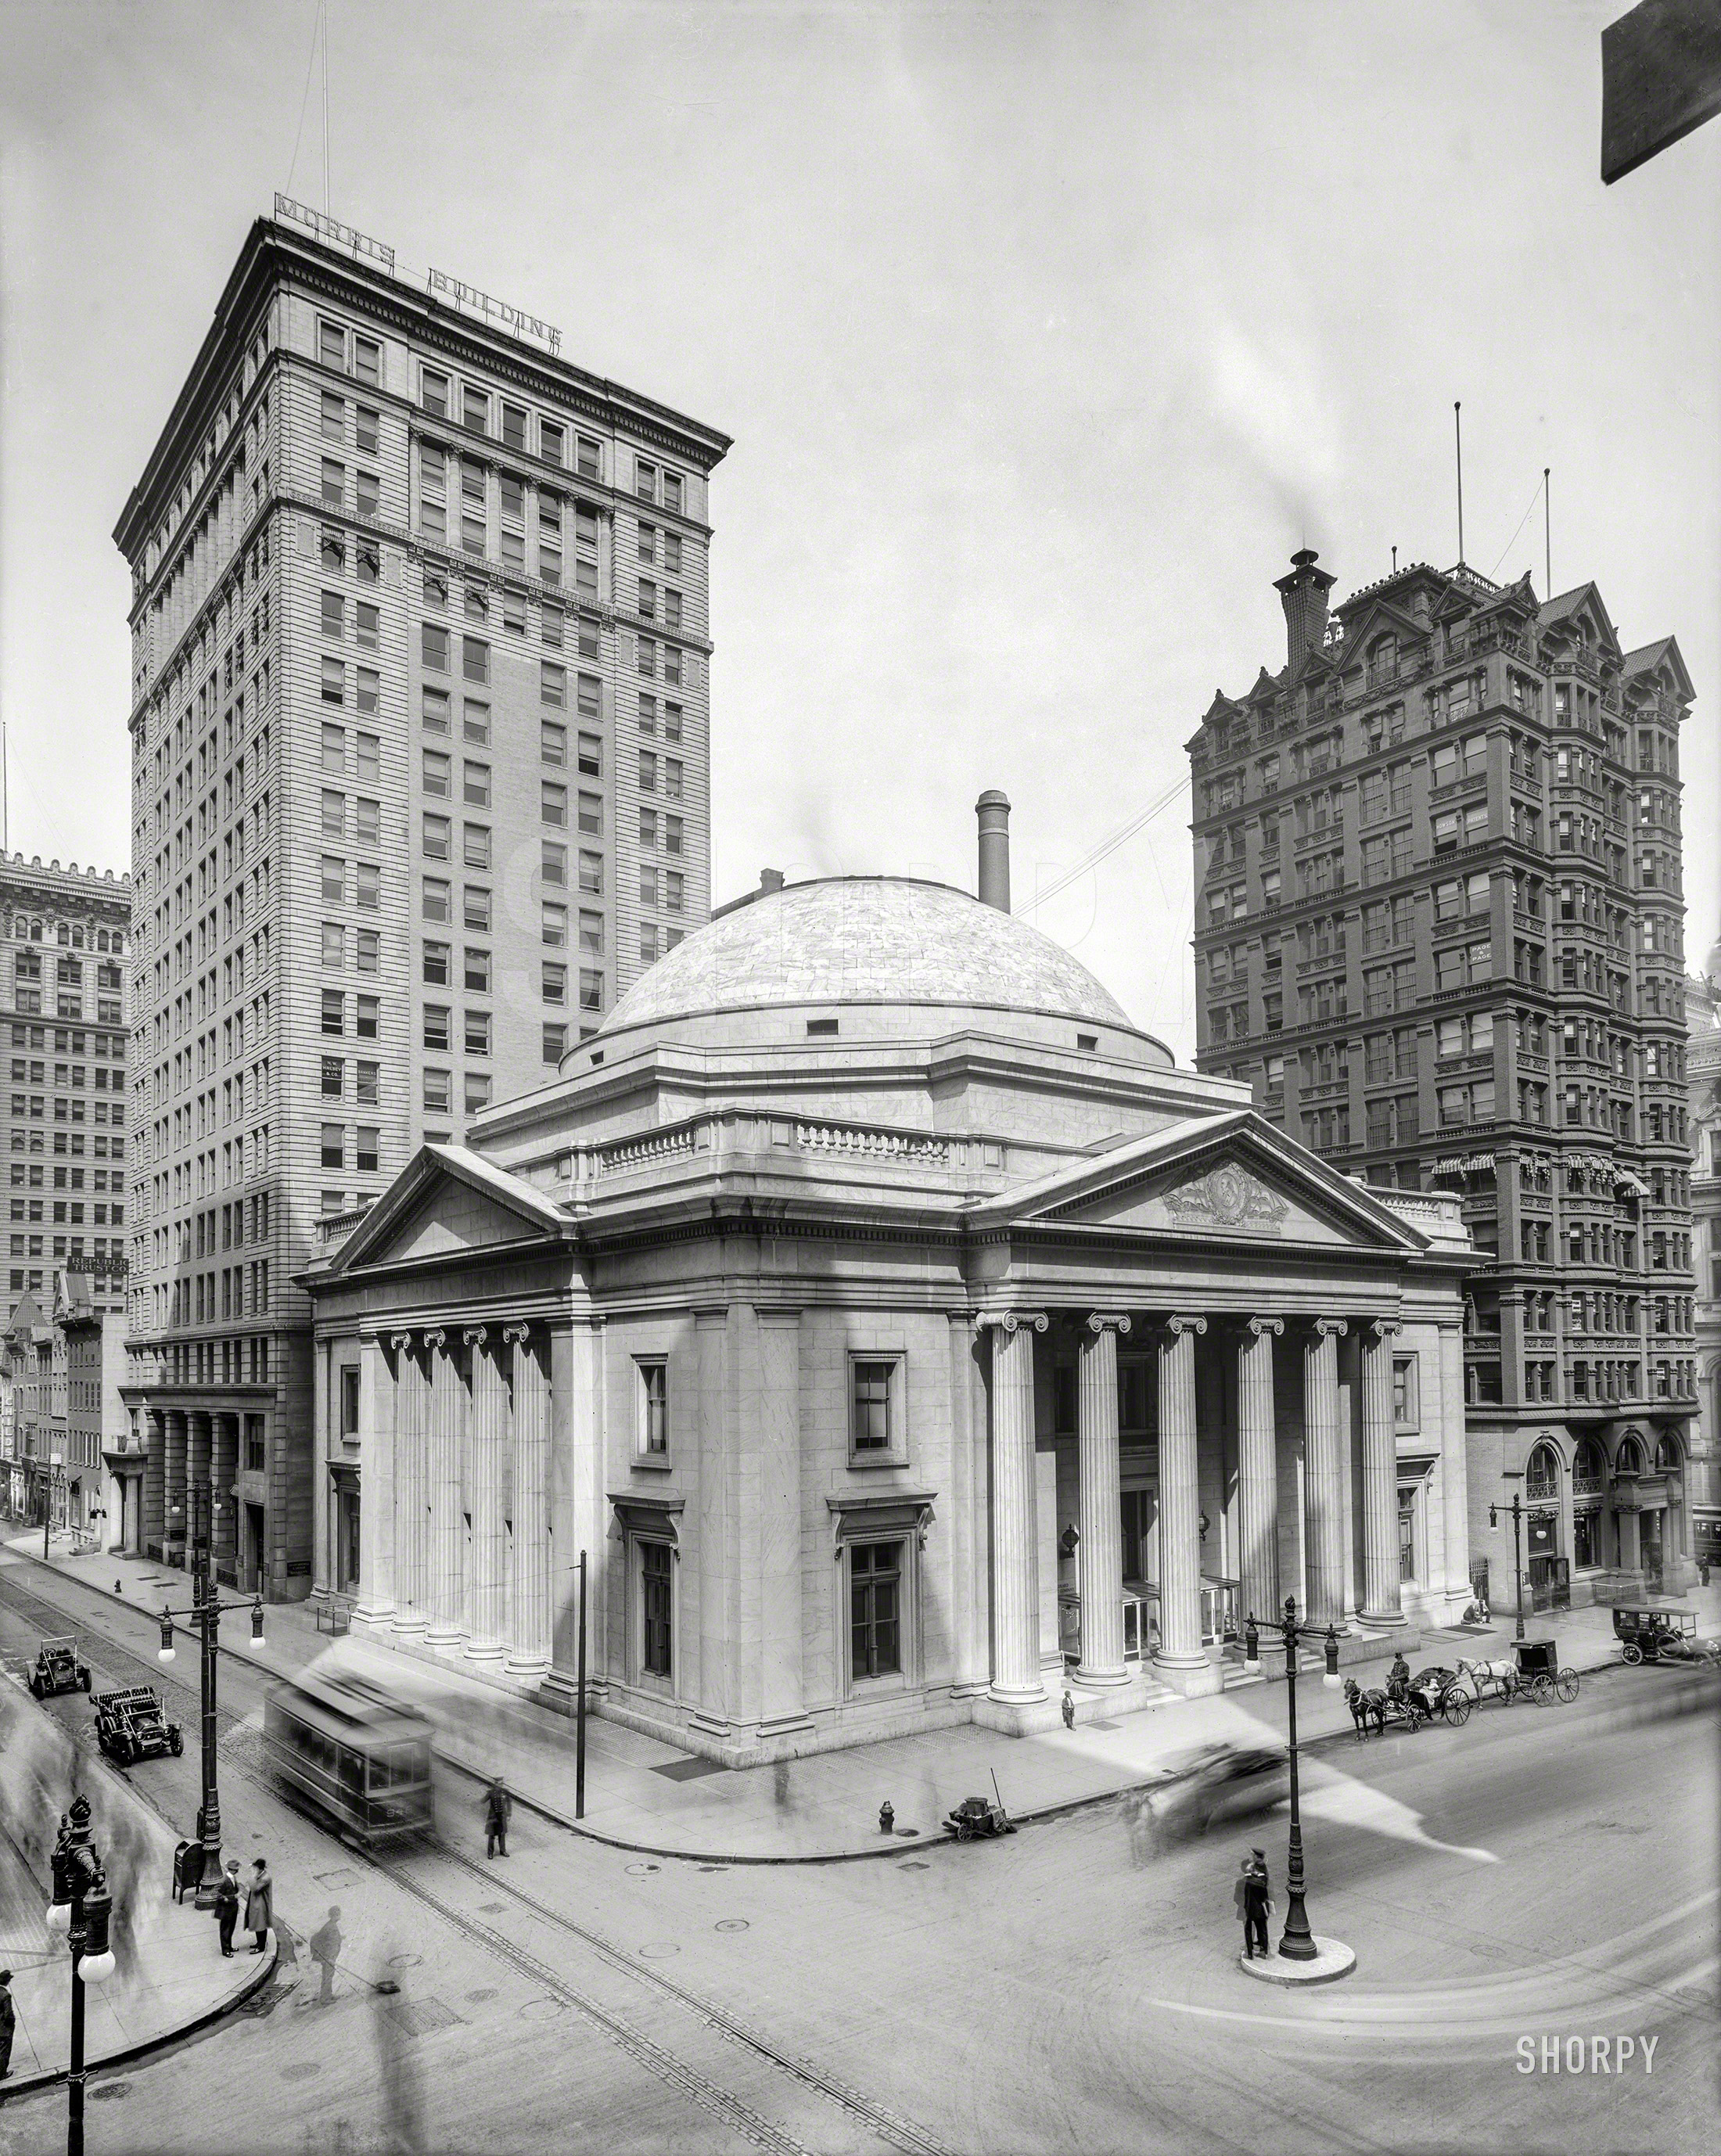 Philadelphia circa 1910. "Girard Trust Bldg., Broad and Chestnut streets." Flanked by the Morris and West End Trust towers. 8x10 glass negative. View full size.